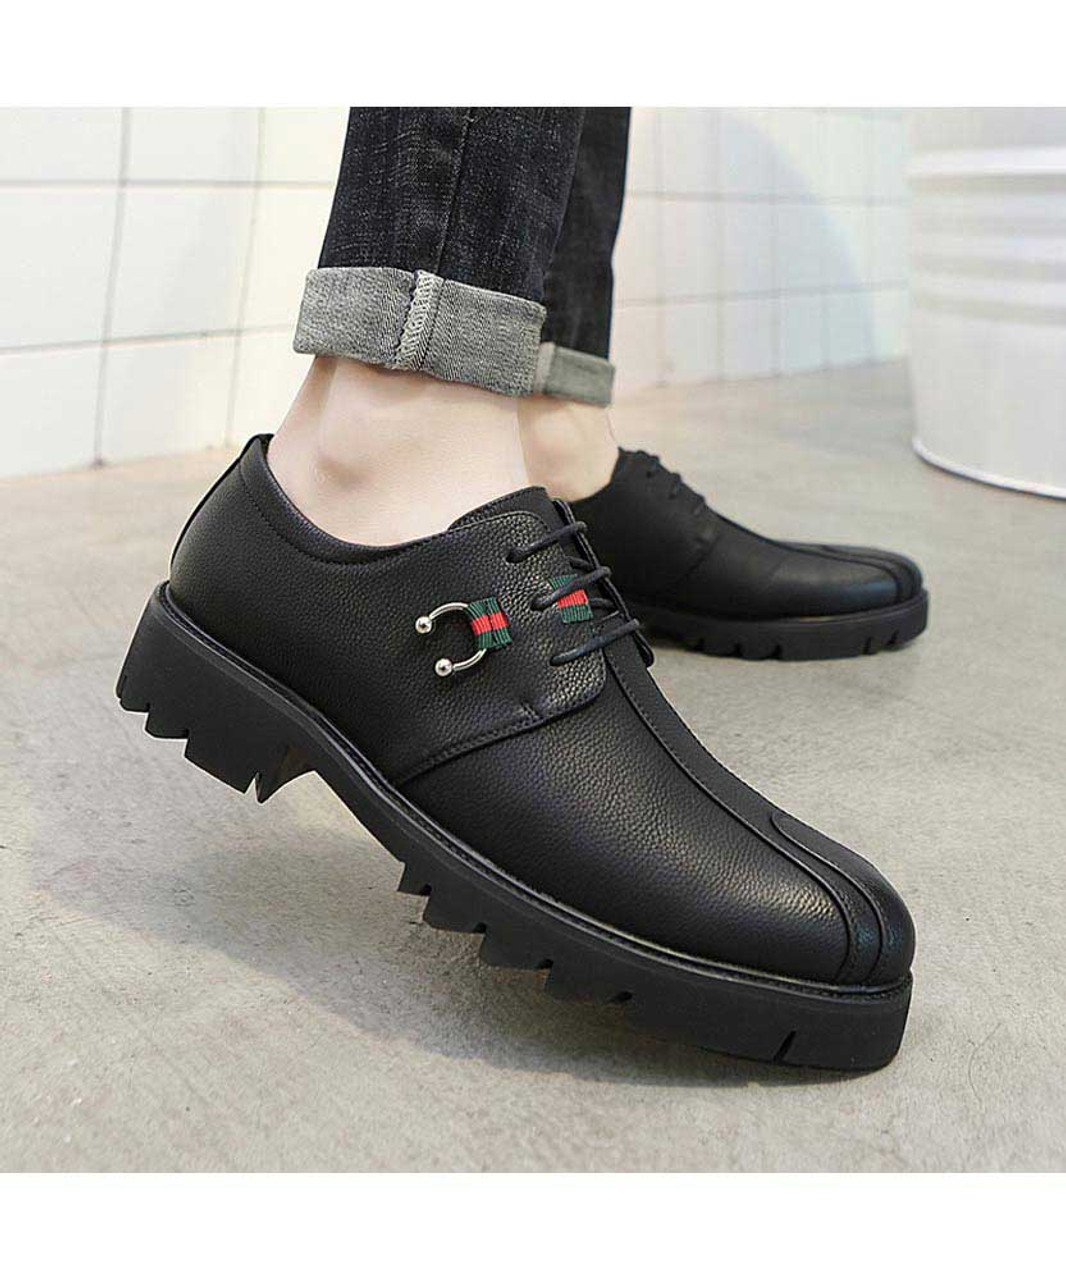 Black leather derby dress shoe with metal decorated | Mens dress shoes ...